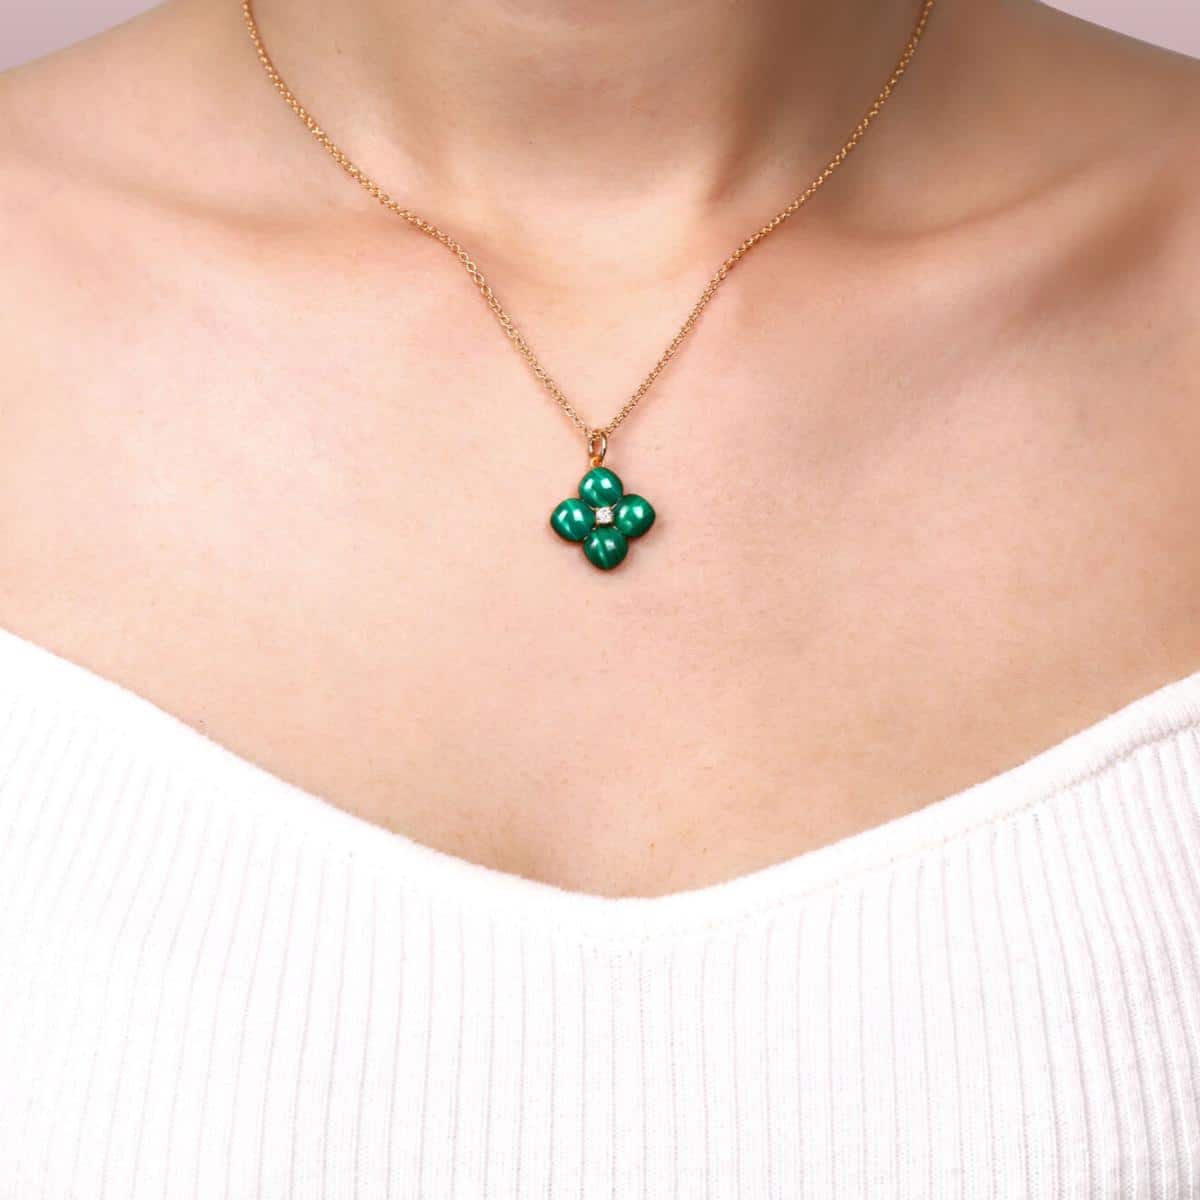 Women's Malachite Flower Pendant Necklace in Yellow Gold Plated Sterling Silver with Cubic Zirconia - 18 Inch Adjustable Cable Chain - Flora | Lavari Jewelers